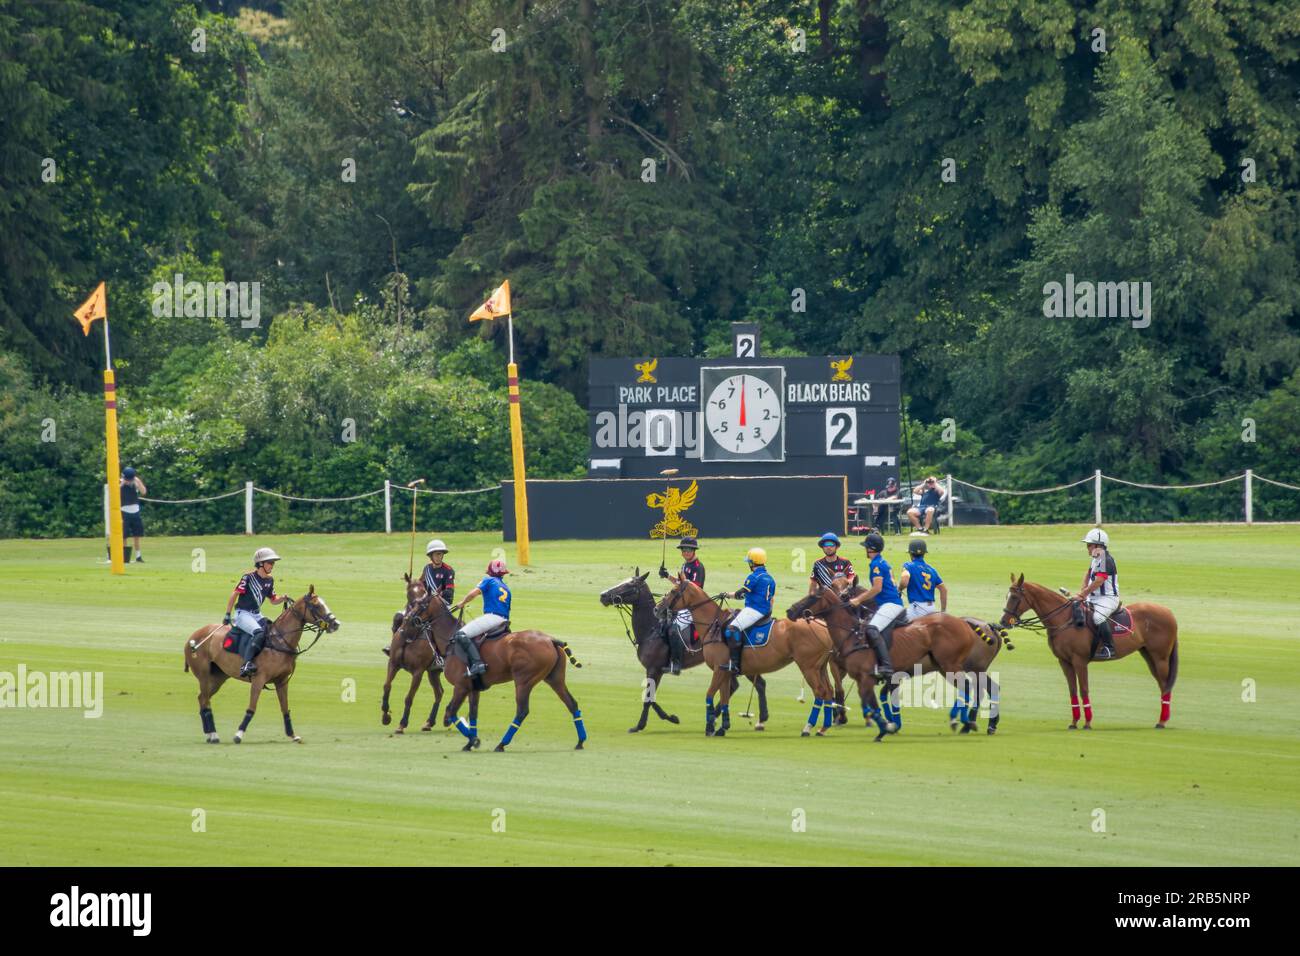 British Open Polo Championship for the Cowdray Gold Cub Park Place versus Black Bears July 6 2023 Stock Photo